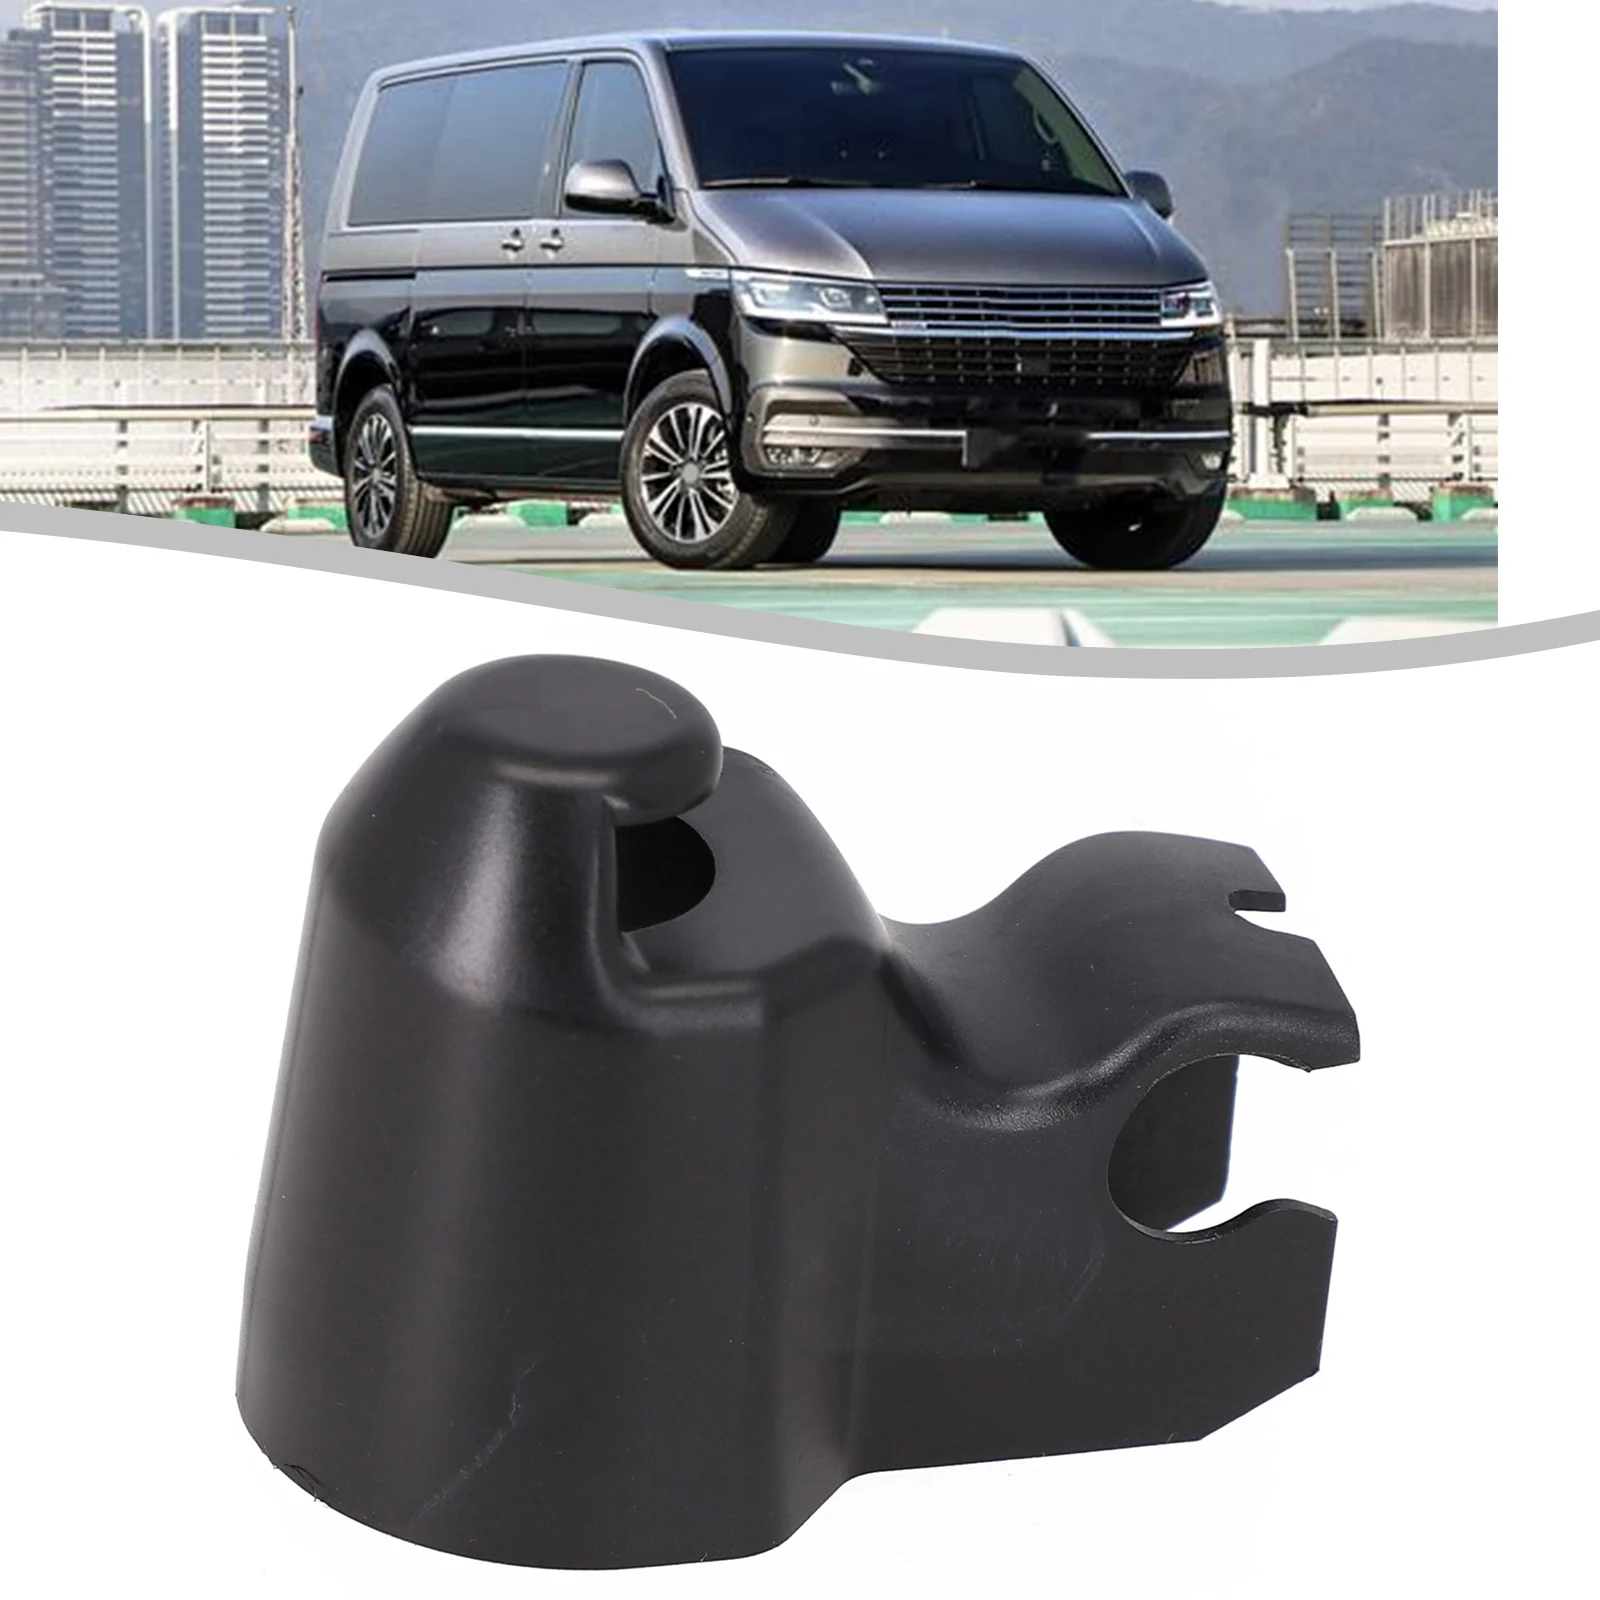 

Easy Installation Rear Wiper Cap Cover for Transporter T4 1991 2003 Replace Broken Damaged Cap OE Number 701837341